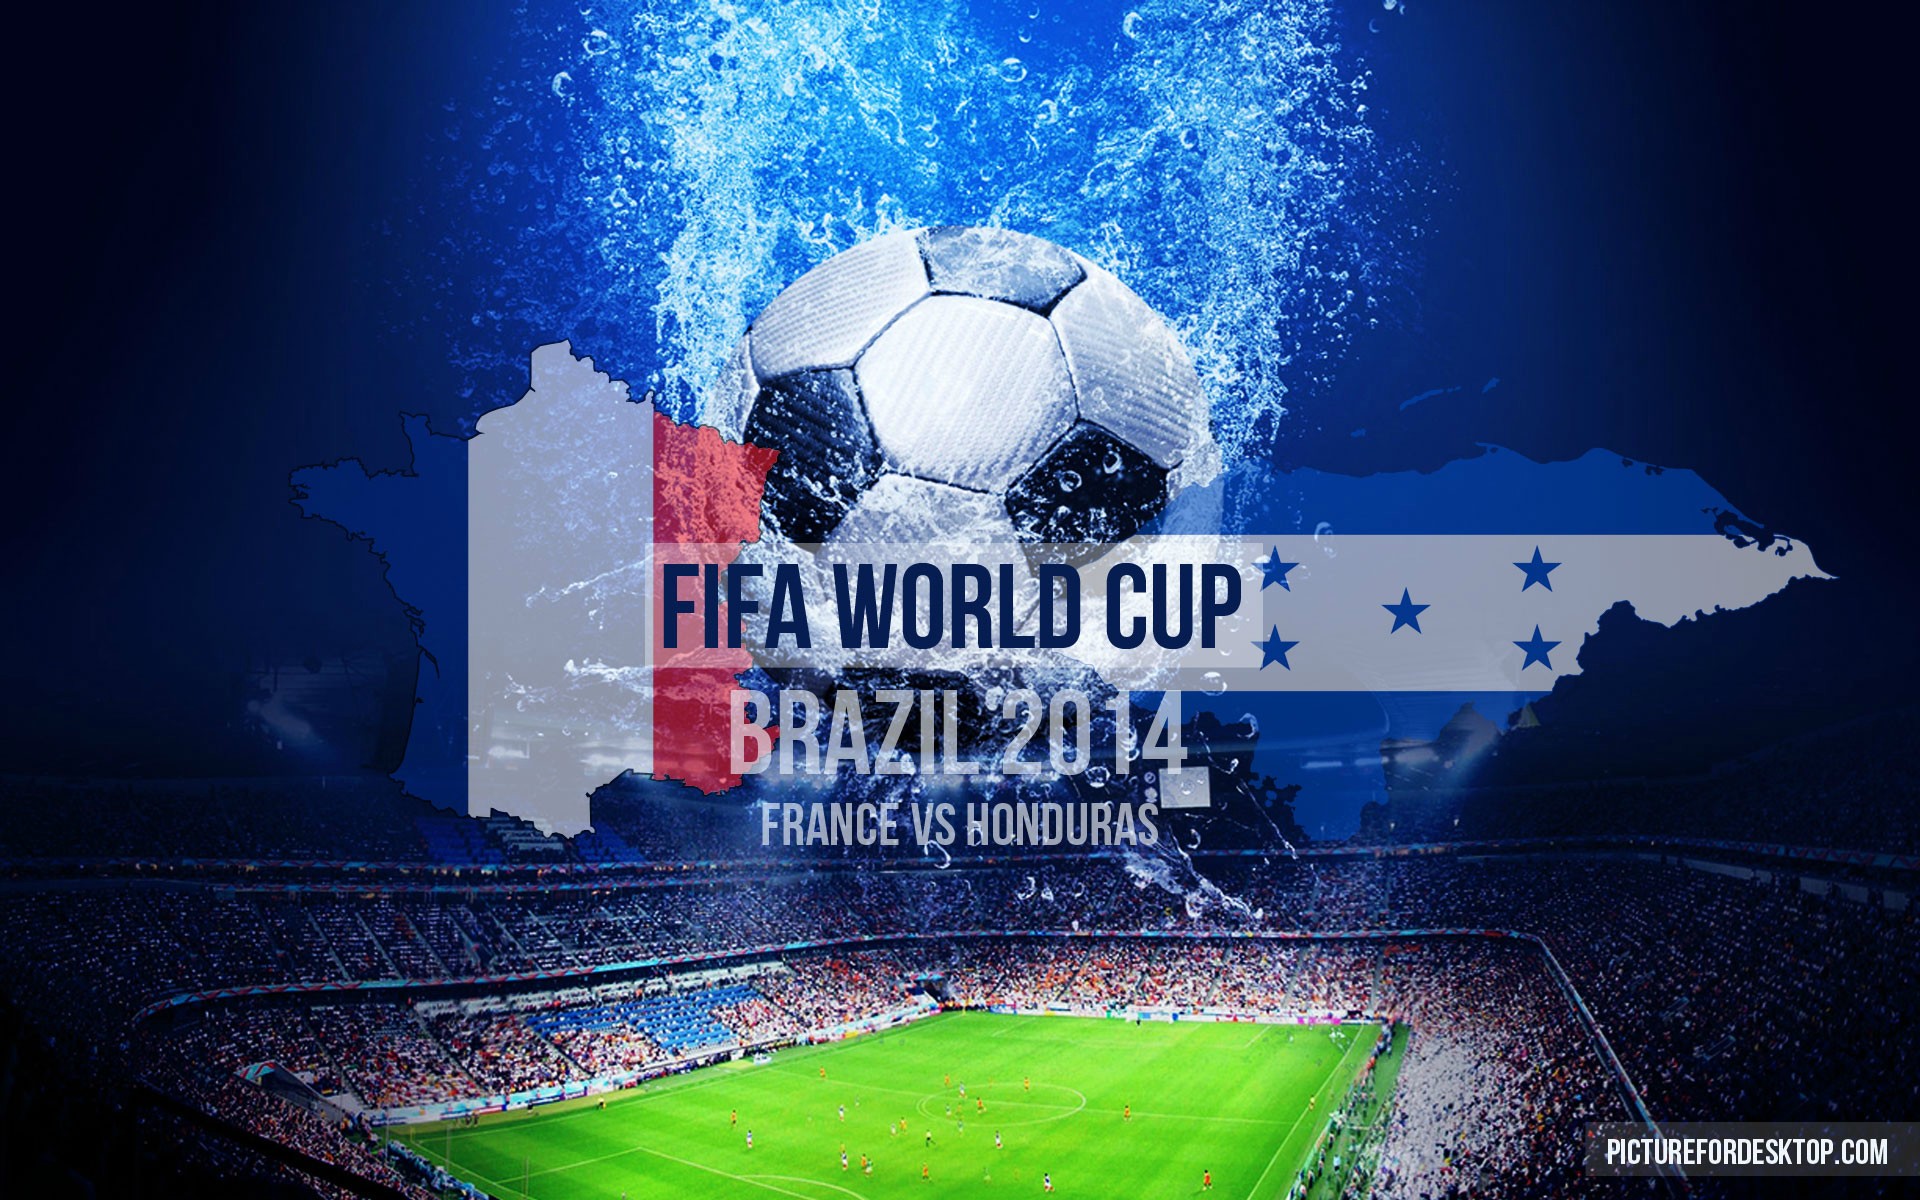 France Vs Honduras Wallpaper Schedule Of Game Posterpicture For